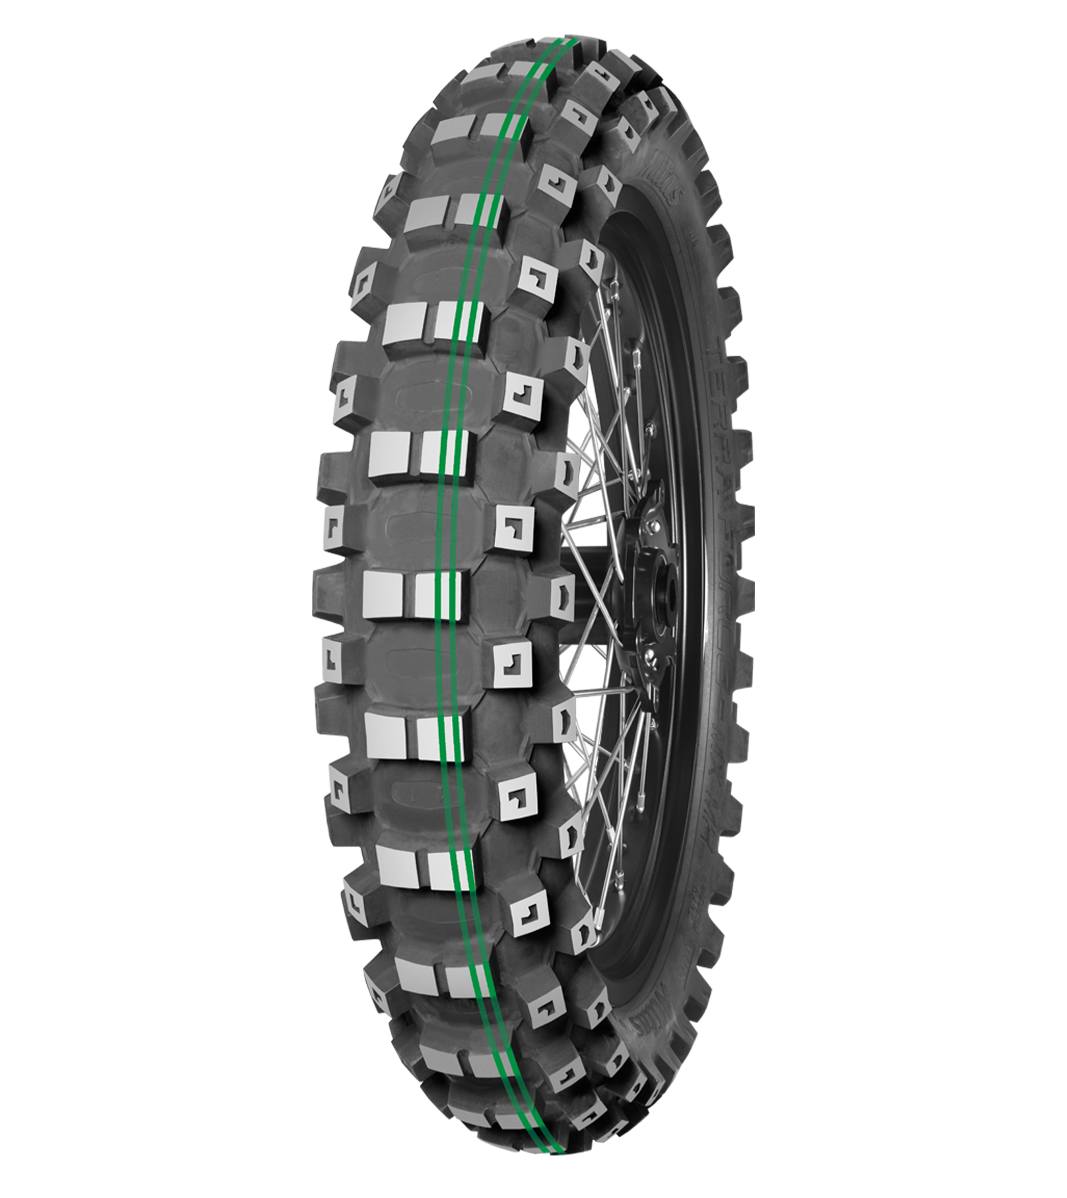 Mitas TERRA FORCE-MX MH 90/100-16 Enduro Competition Off-Road SUPER SOFT EXTREME 51M 2 Green Tube Rear Tire, 226085, 90/100-16, Enduro Competition, Off-Road, Rear, Terra Force, Terra Force-MX MH, Trail, Tires - Imported and distributed in North & South America by Lindeco Genuine Powersports - Premier Powersports Equipment and Accessories for Motorcycle Enthusiasts, Professional Riders and Dealers.